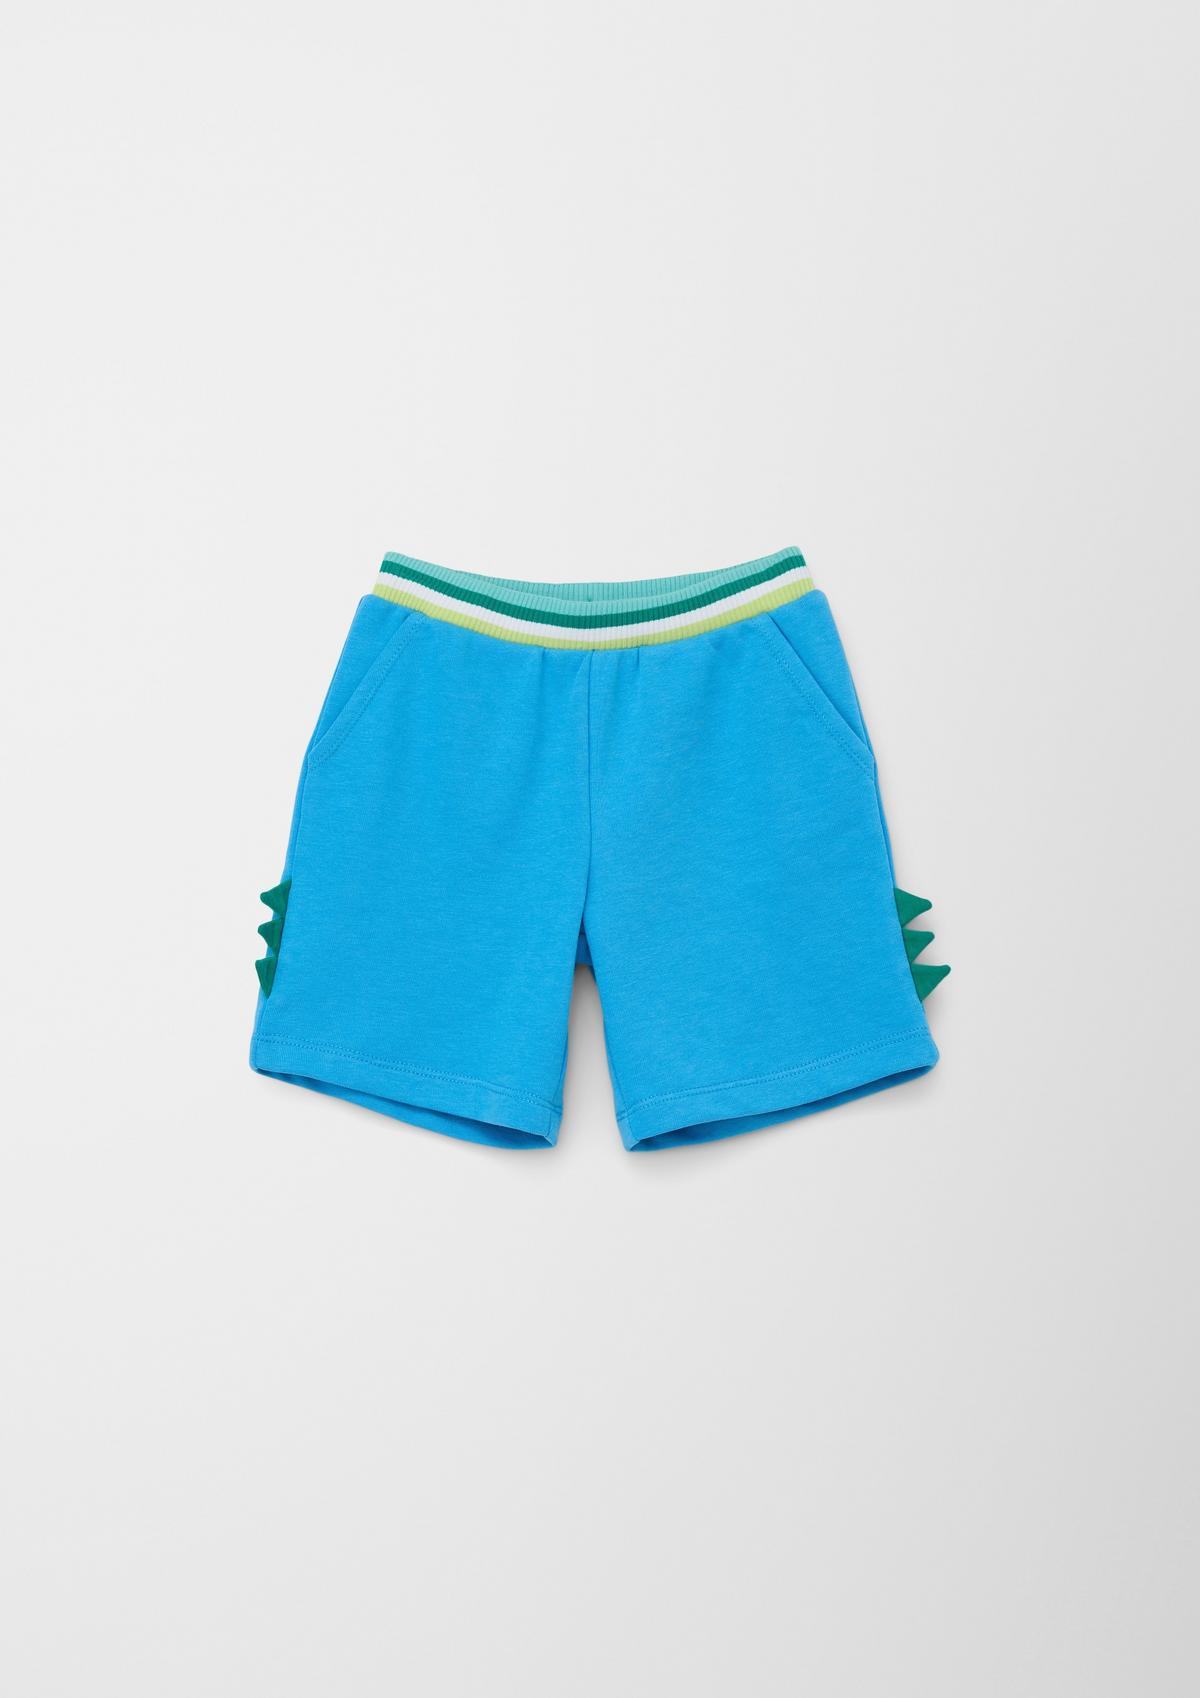 Find Bermuda shorts for boys and teens online